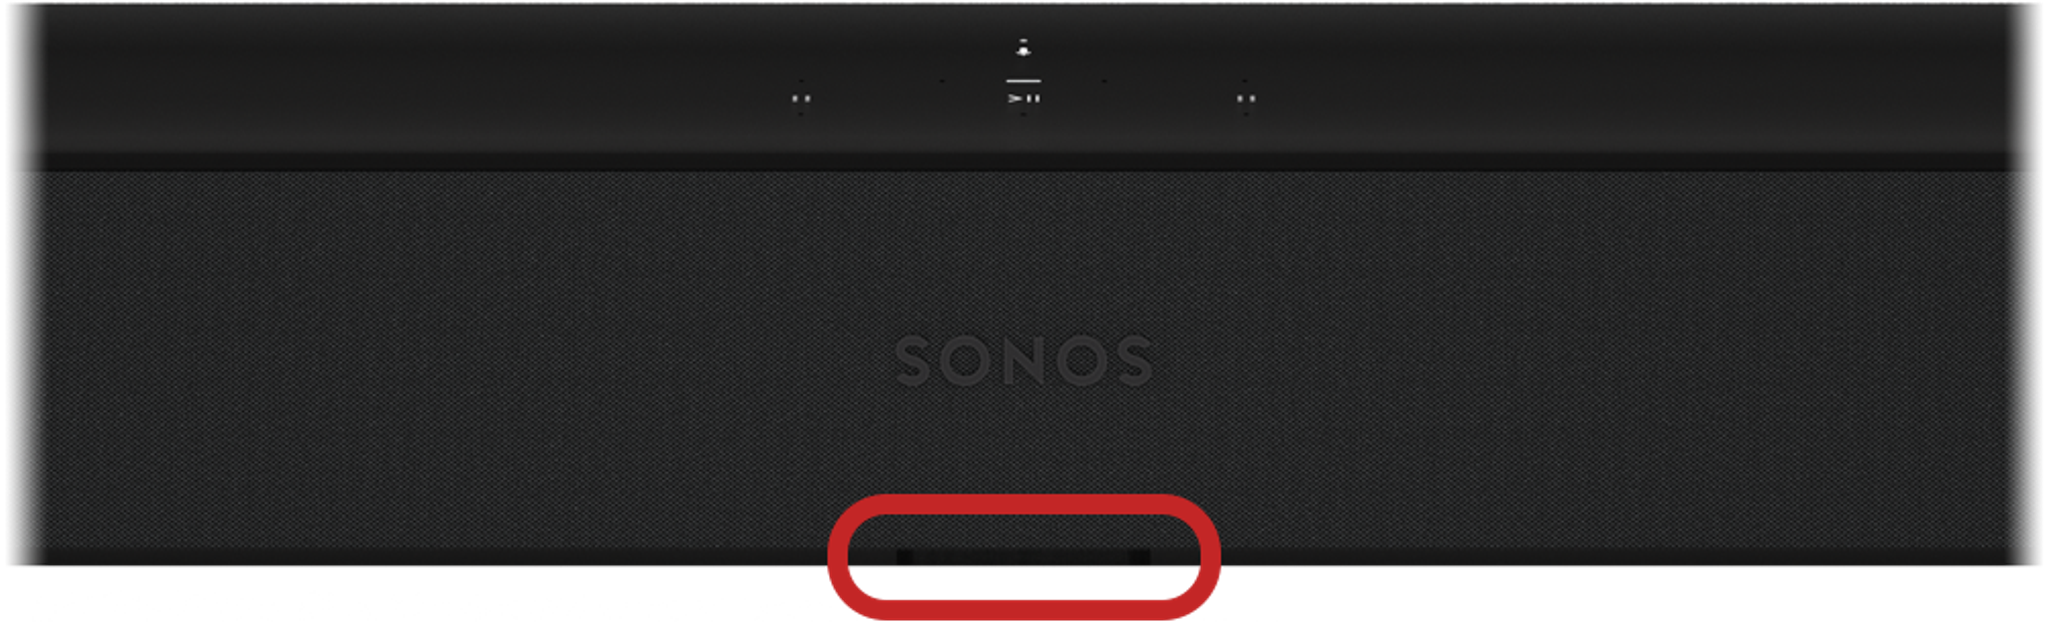 sensor location on home theater products | Sonos